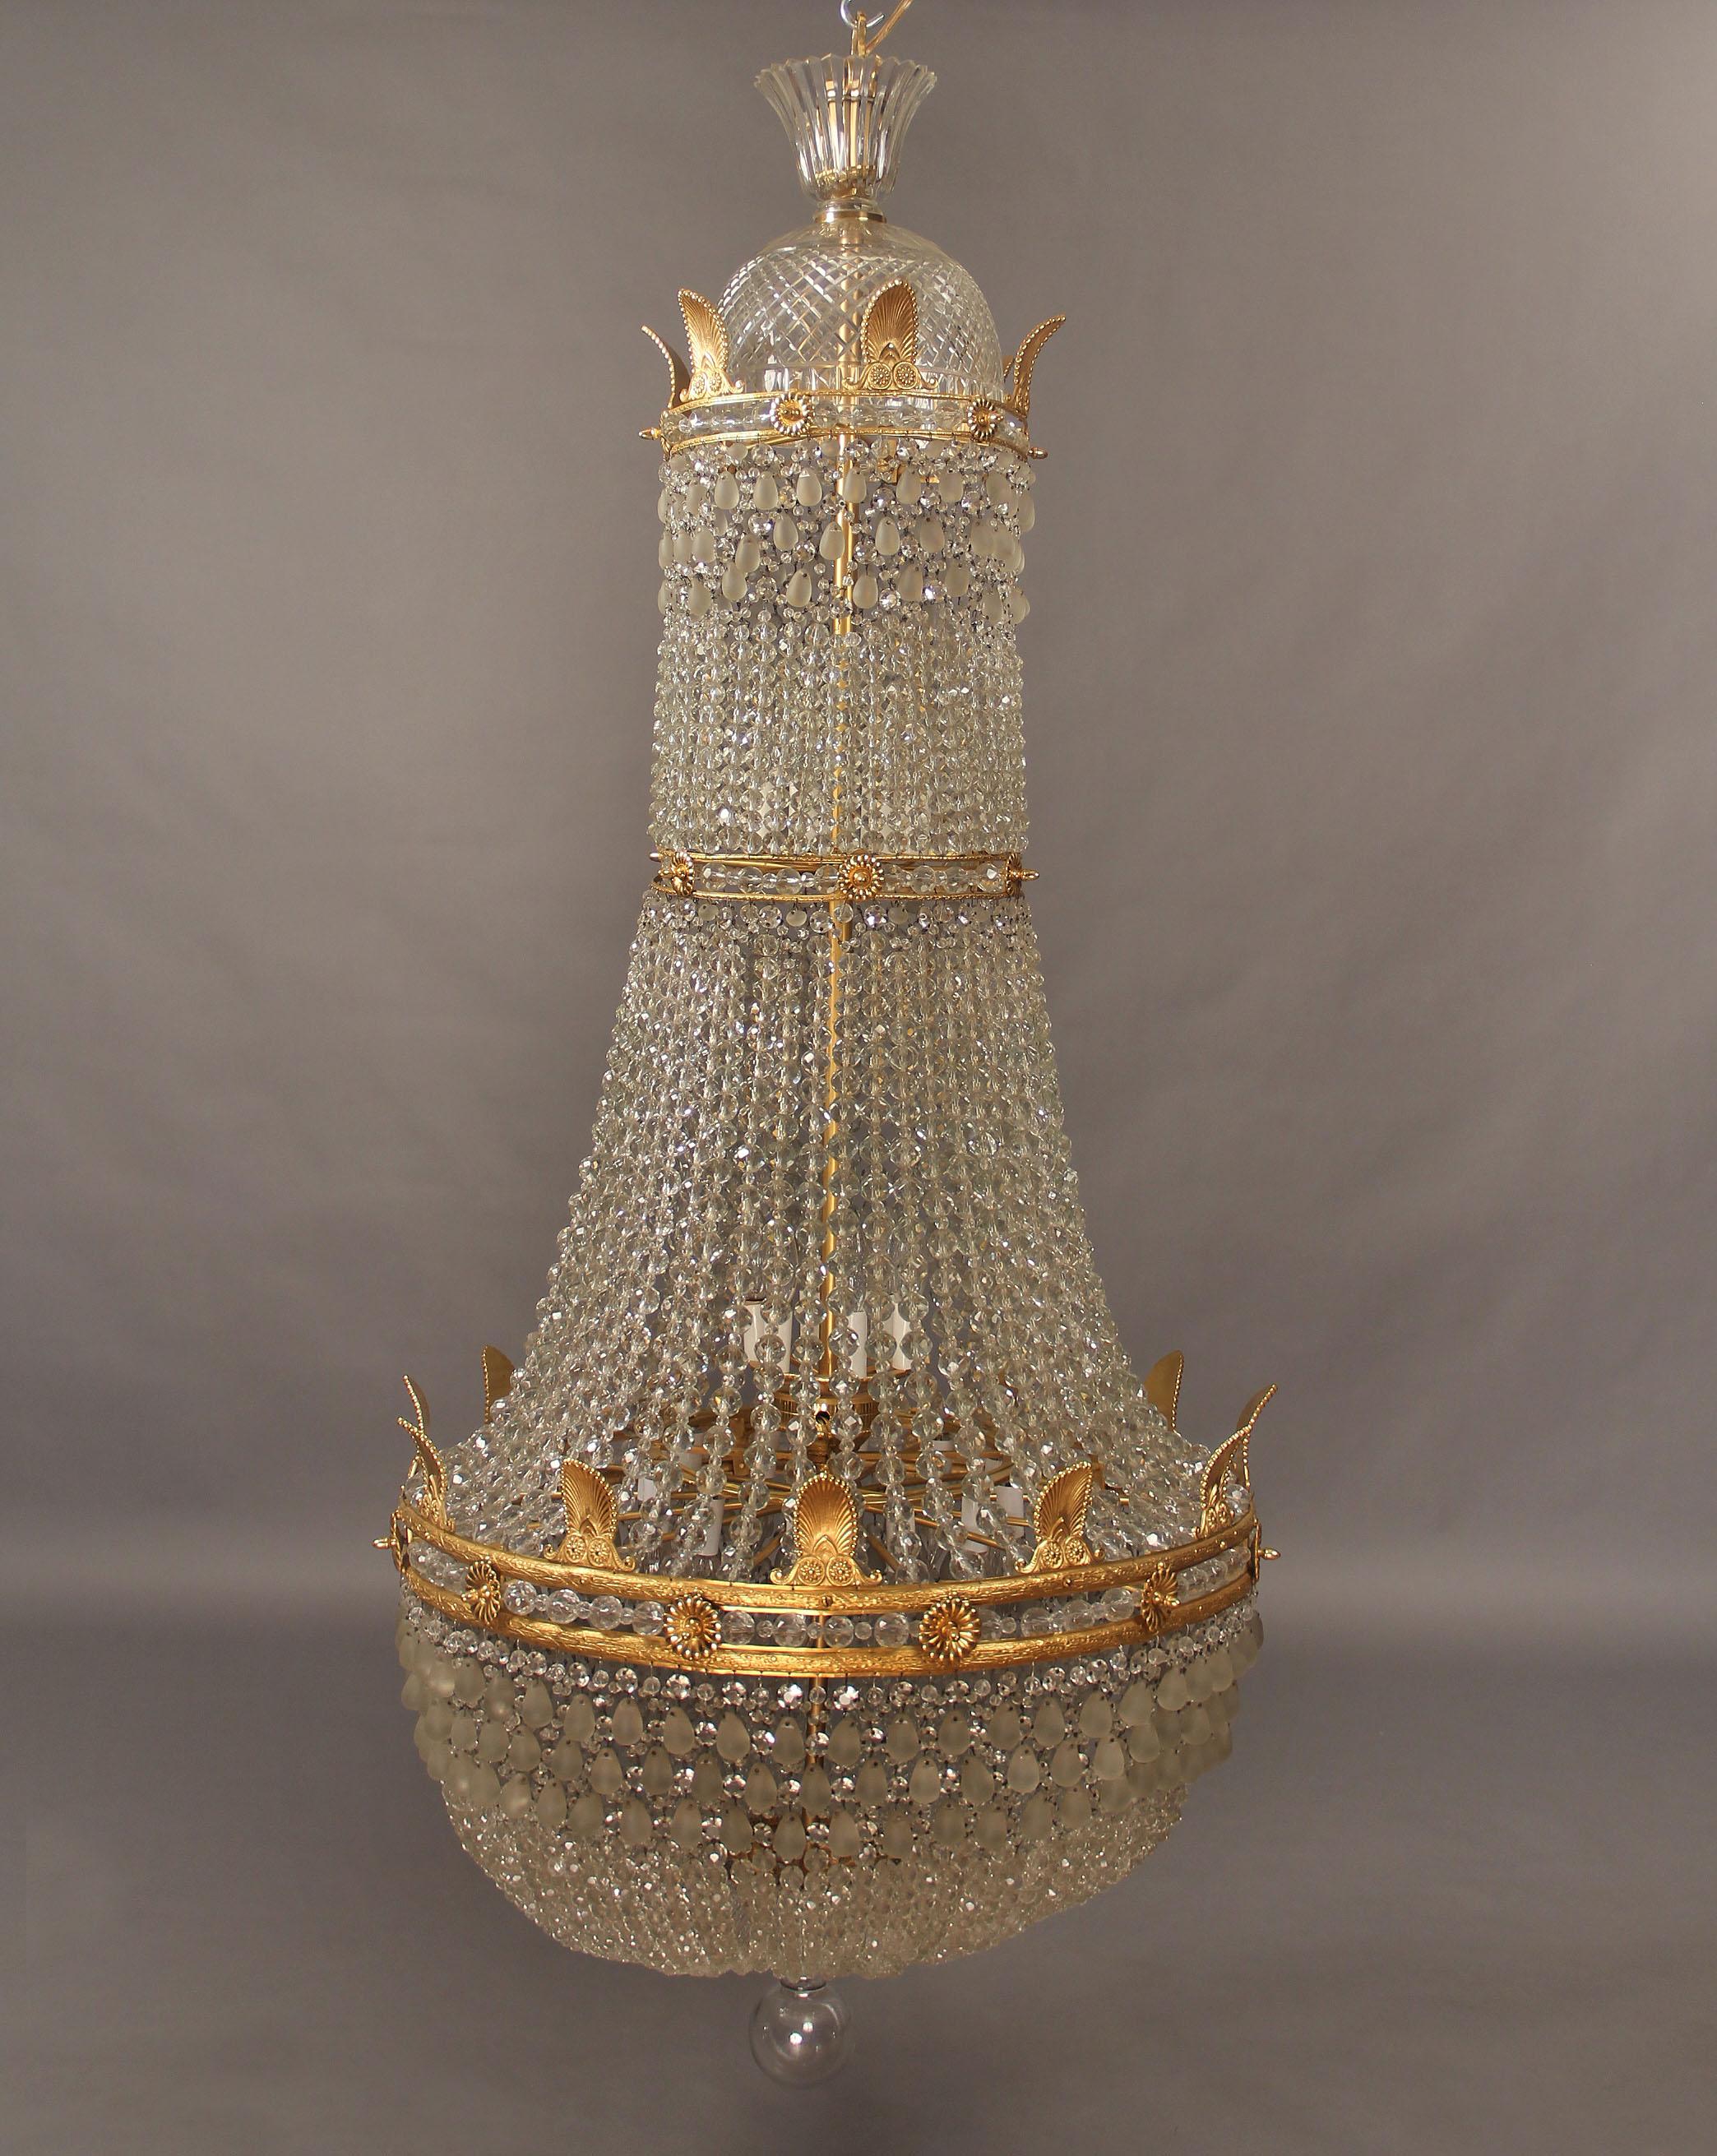 An Important Late 19th/Early 20th Century gilt bronze and beaded twenty four light Empire Style basket chandelier

With a crystal dome crown and bronze empire designs, twenty four tiered interior lights.
 